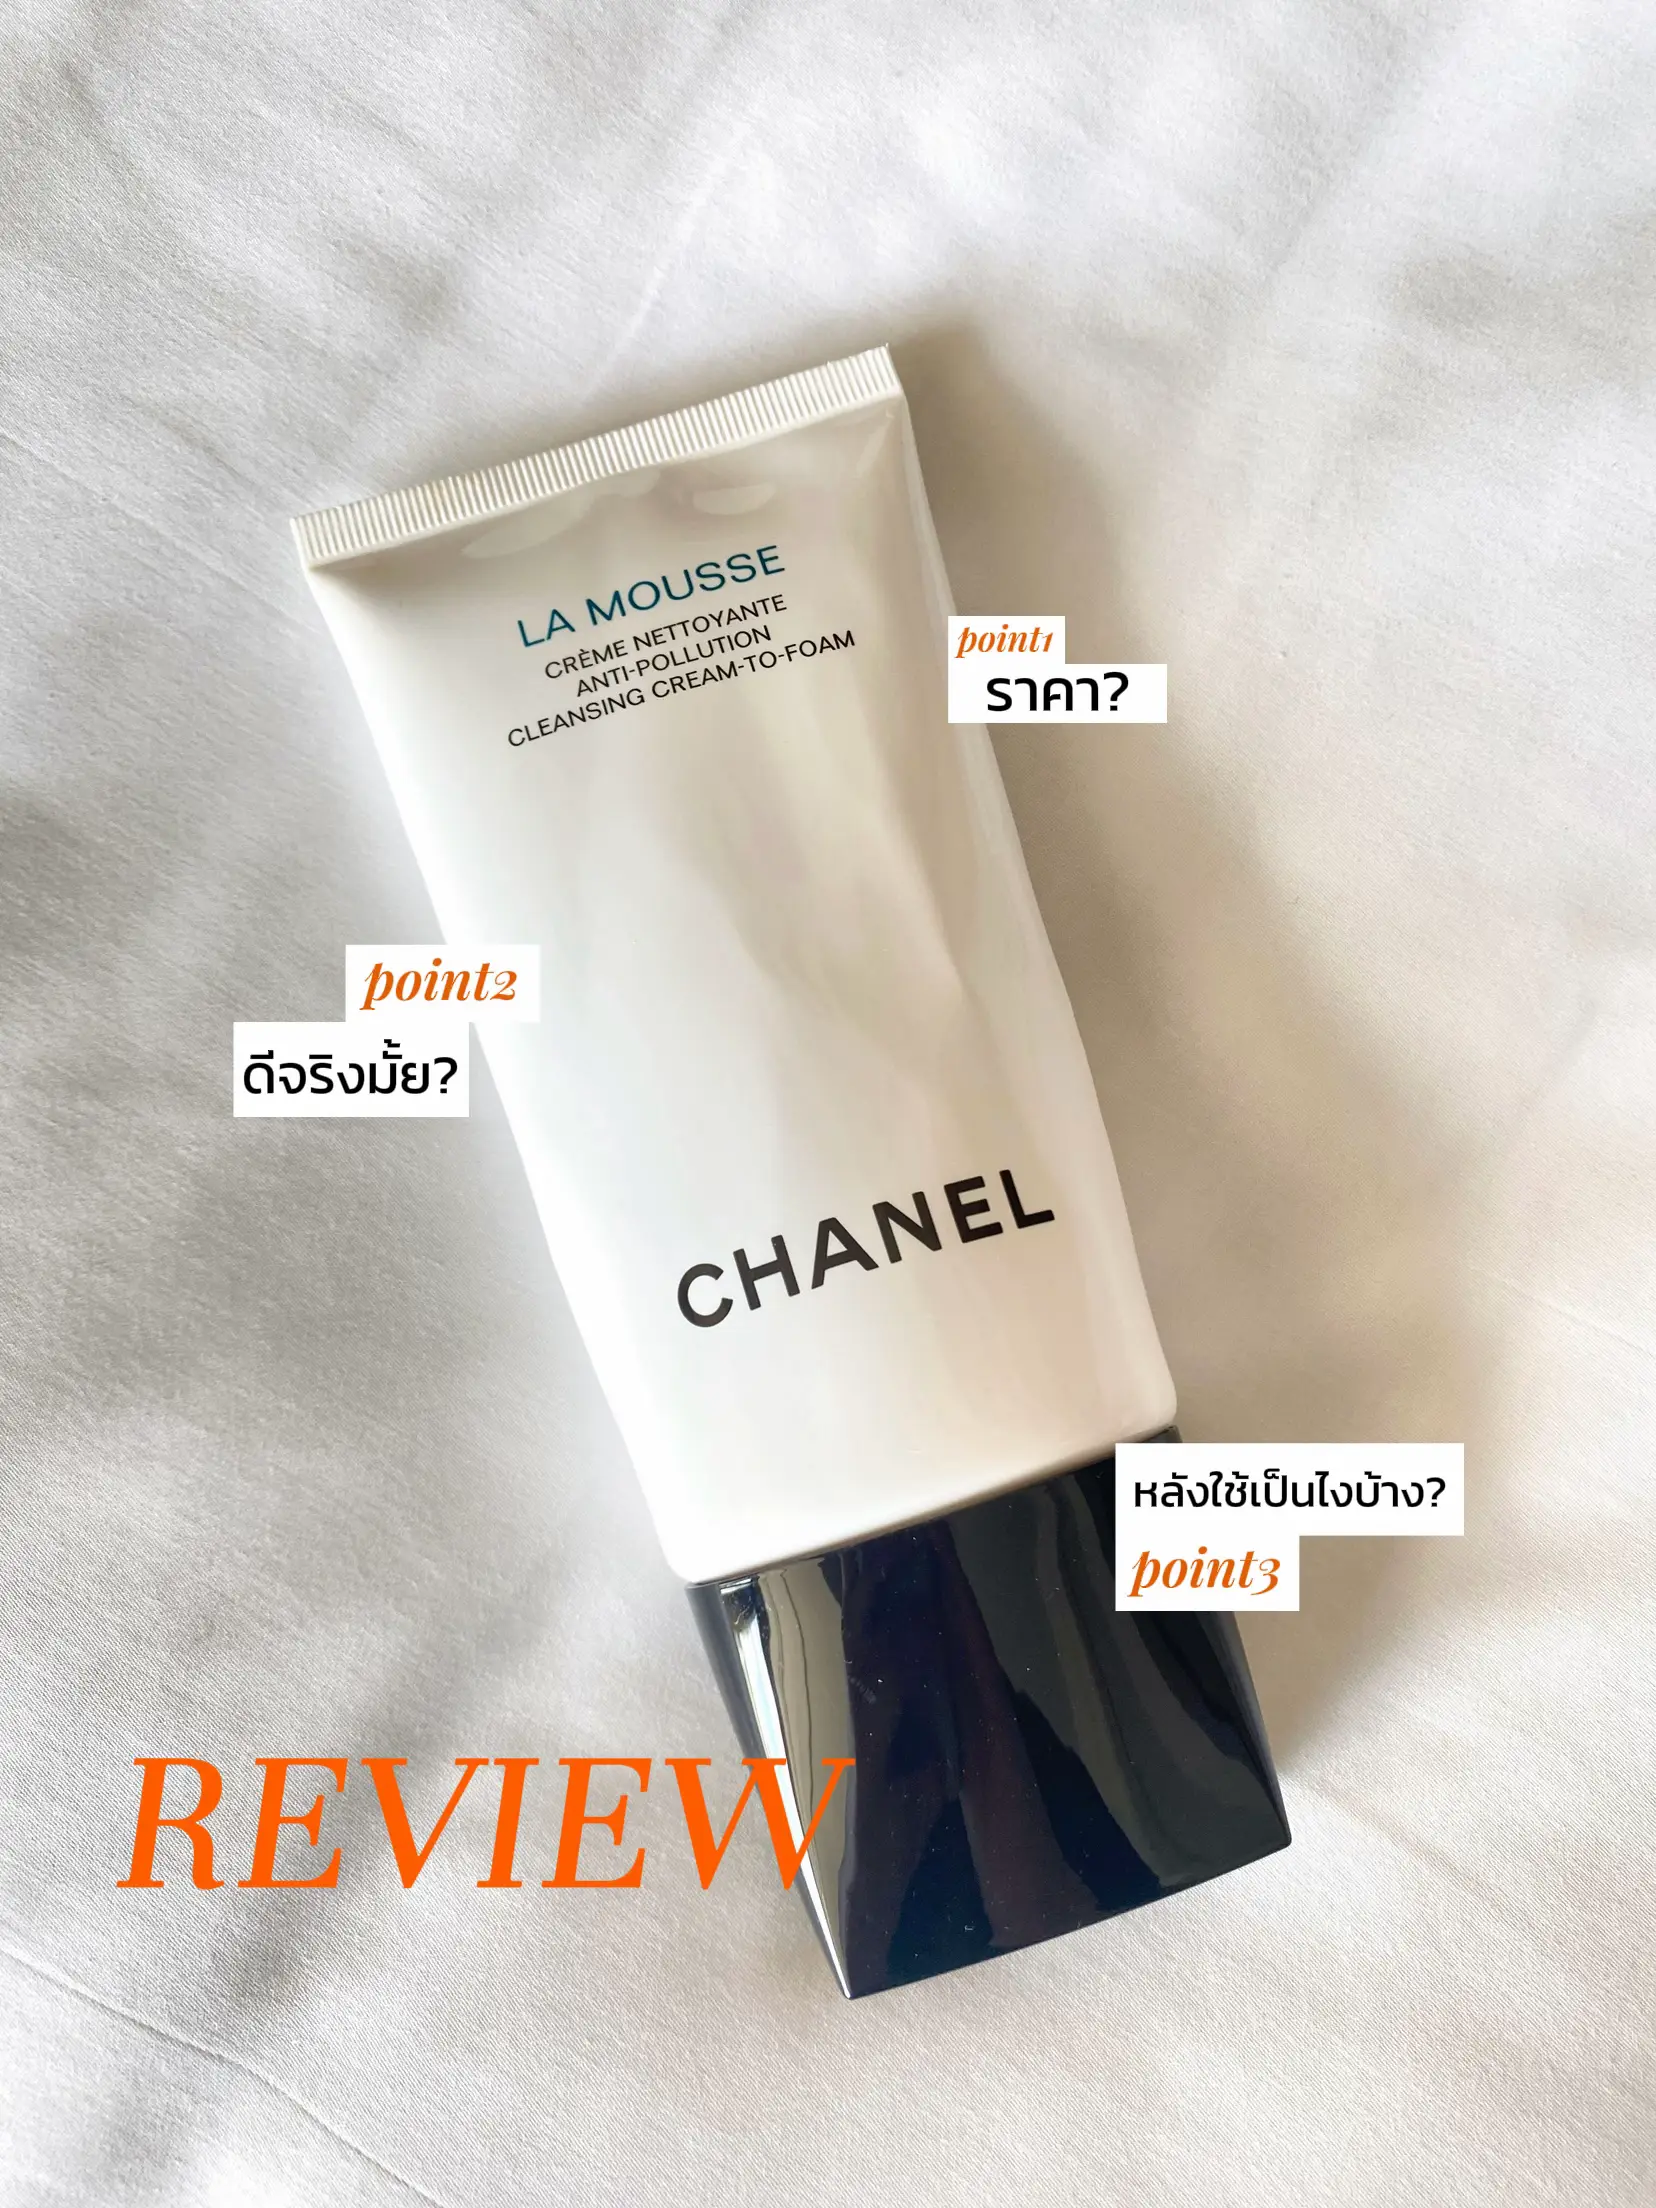 Is it really good? CHANEL Facial Foam Wash👀, Gallery posted by ao_xingg